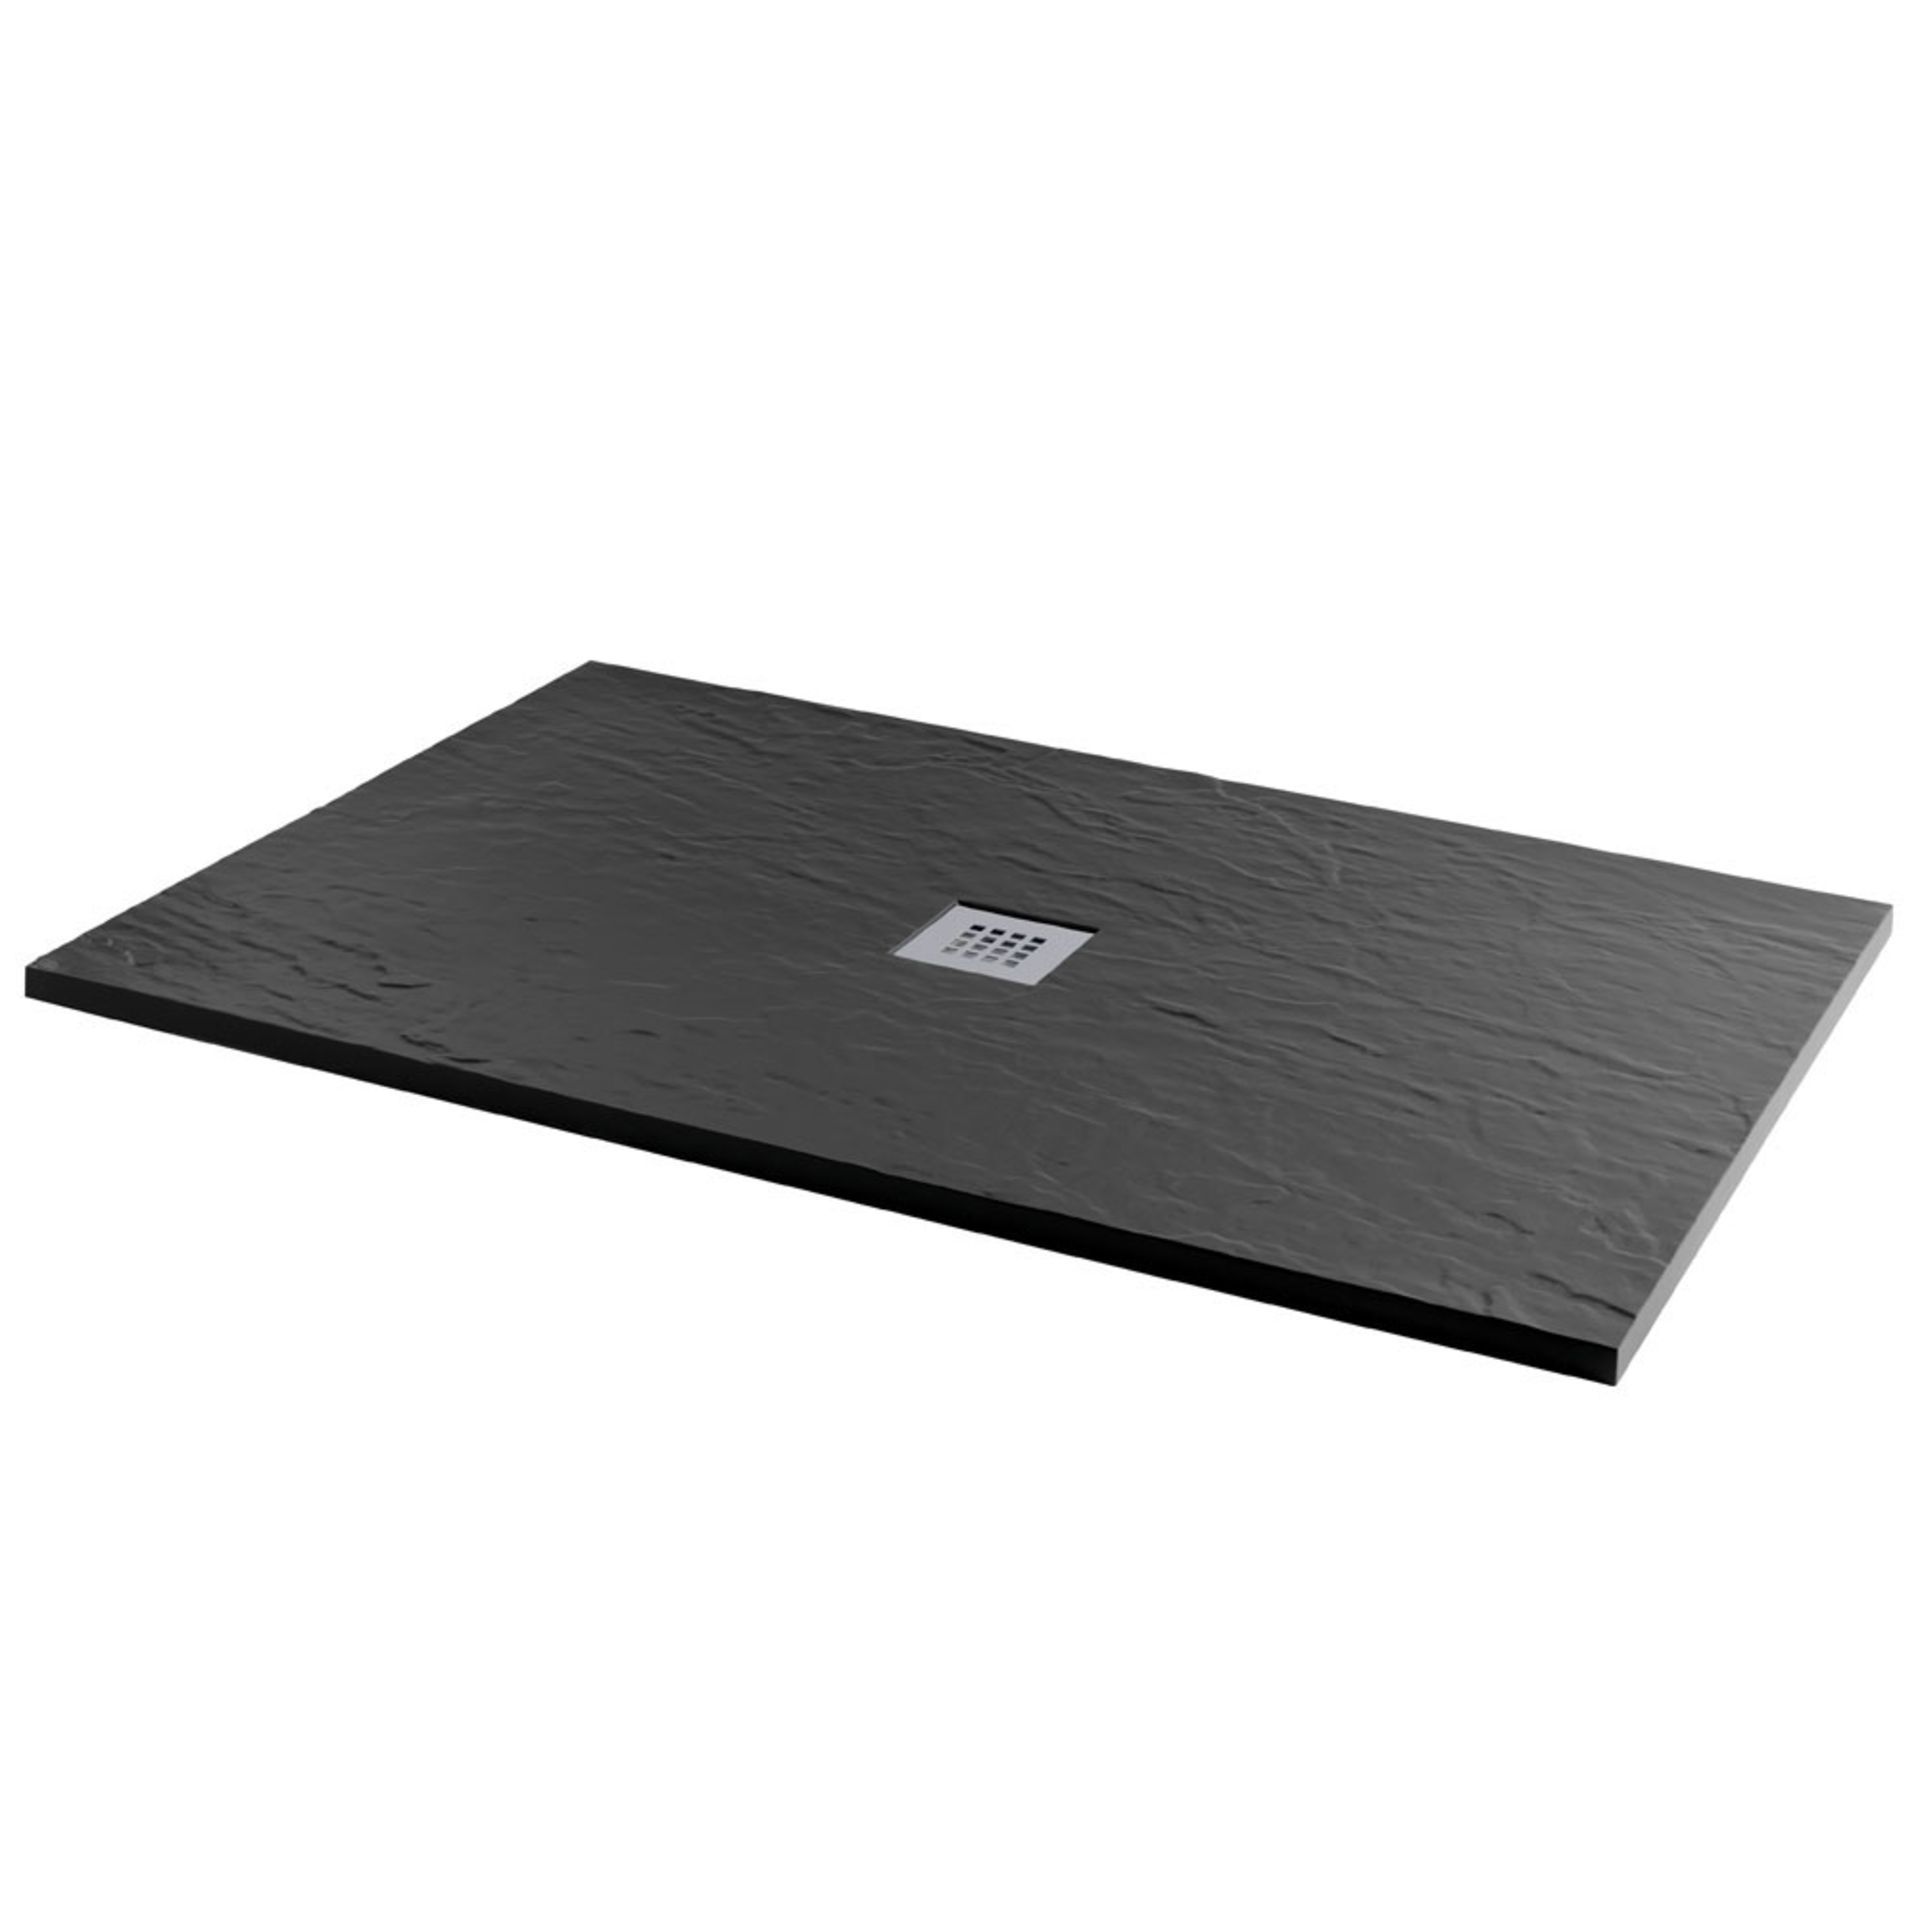 NEW 1000x800mm Rectangle Black Slate Effect Shower Tray.RRP £569.99.A textured black slate eff... - Image 2 of 2